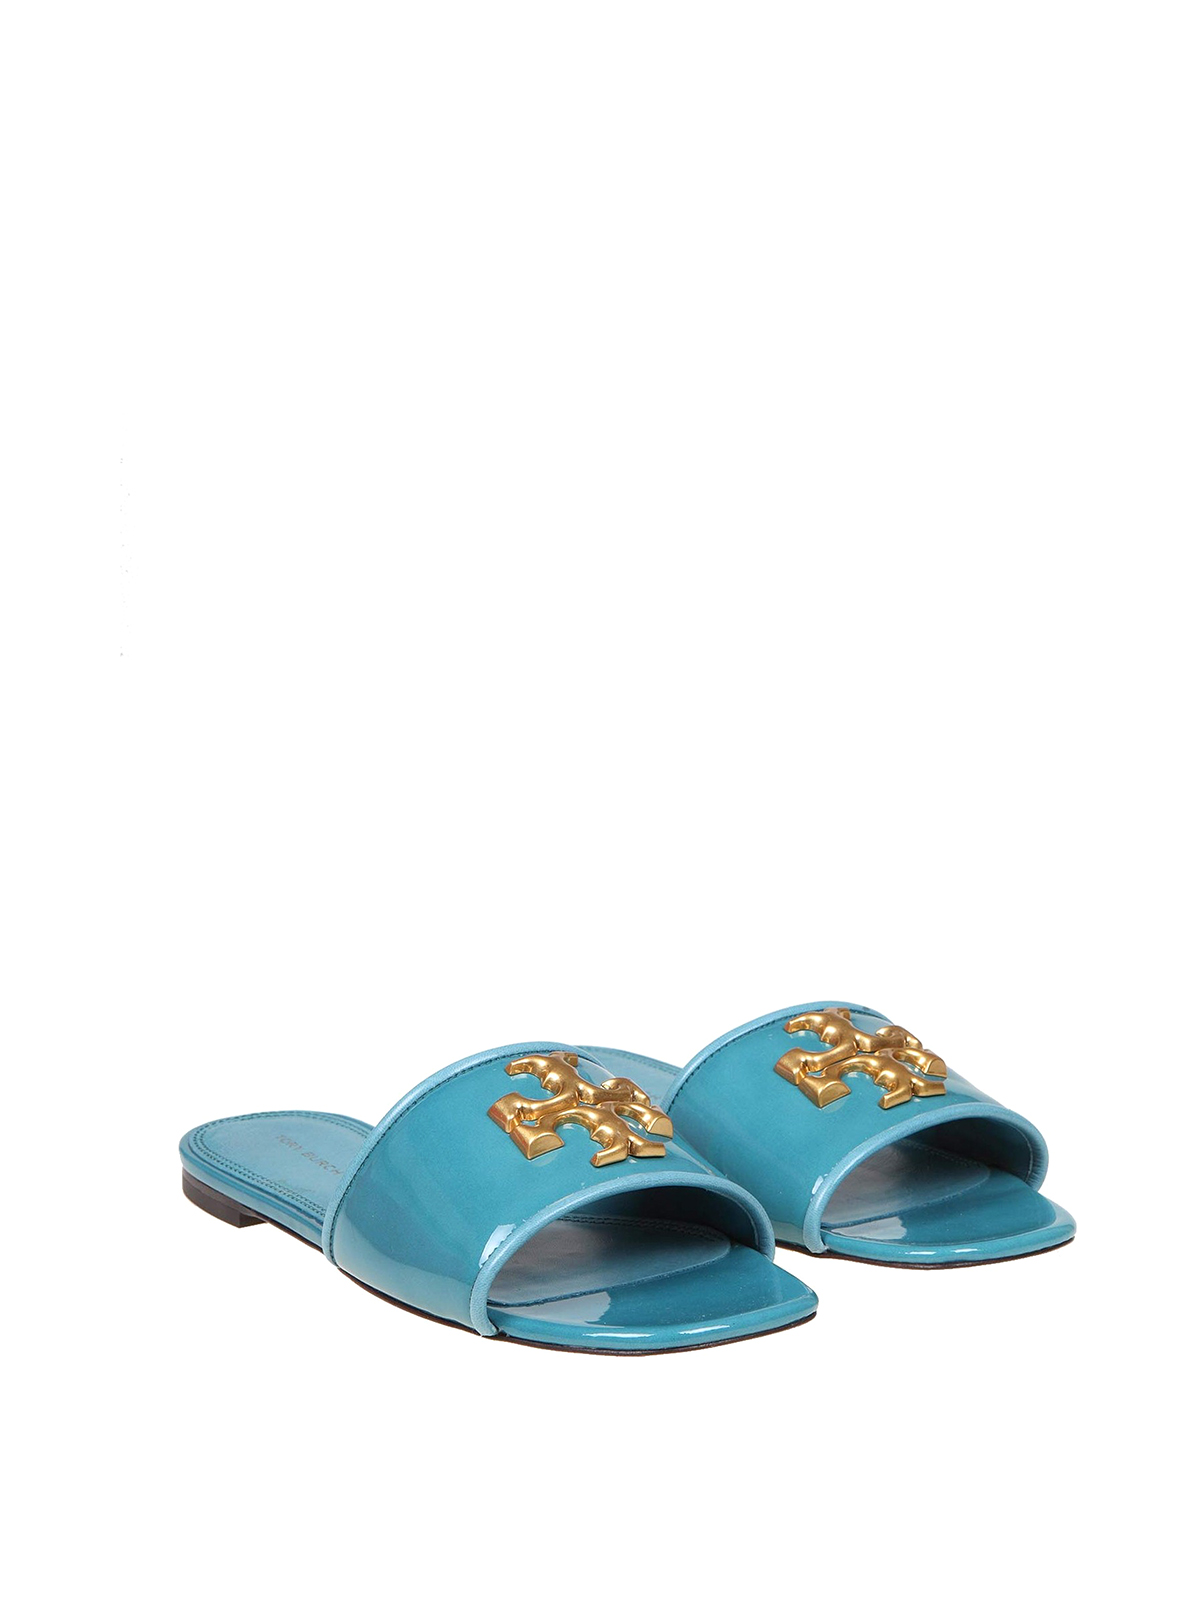 Sandals Tory Burch - Eleanor Slide in patent leather - 141278400